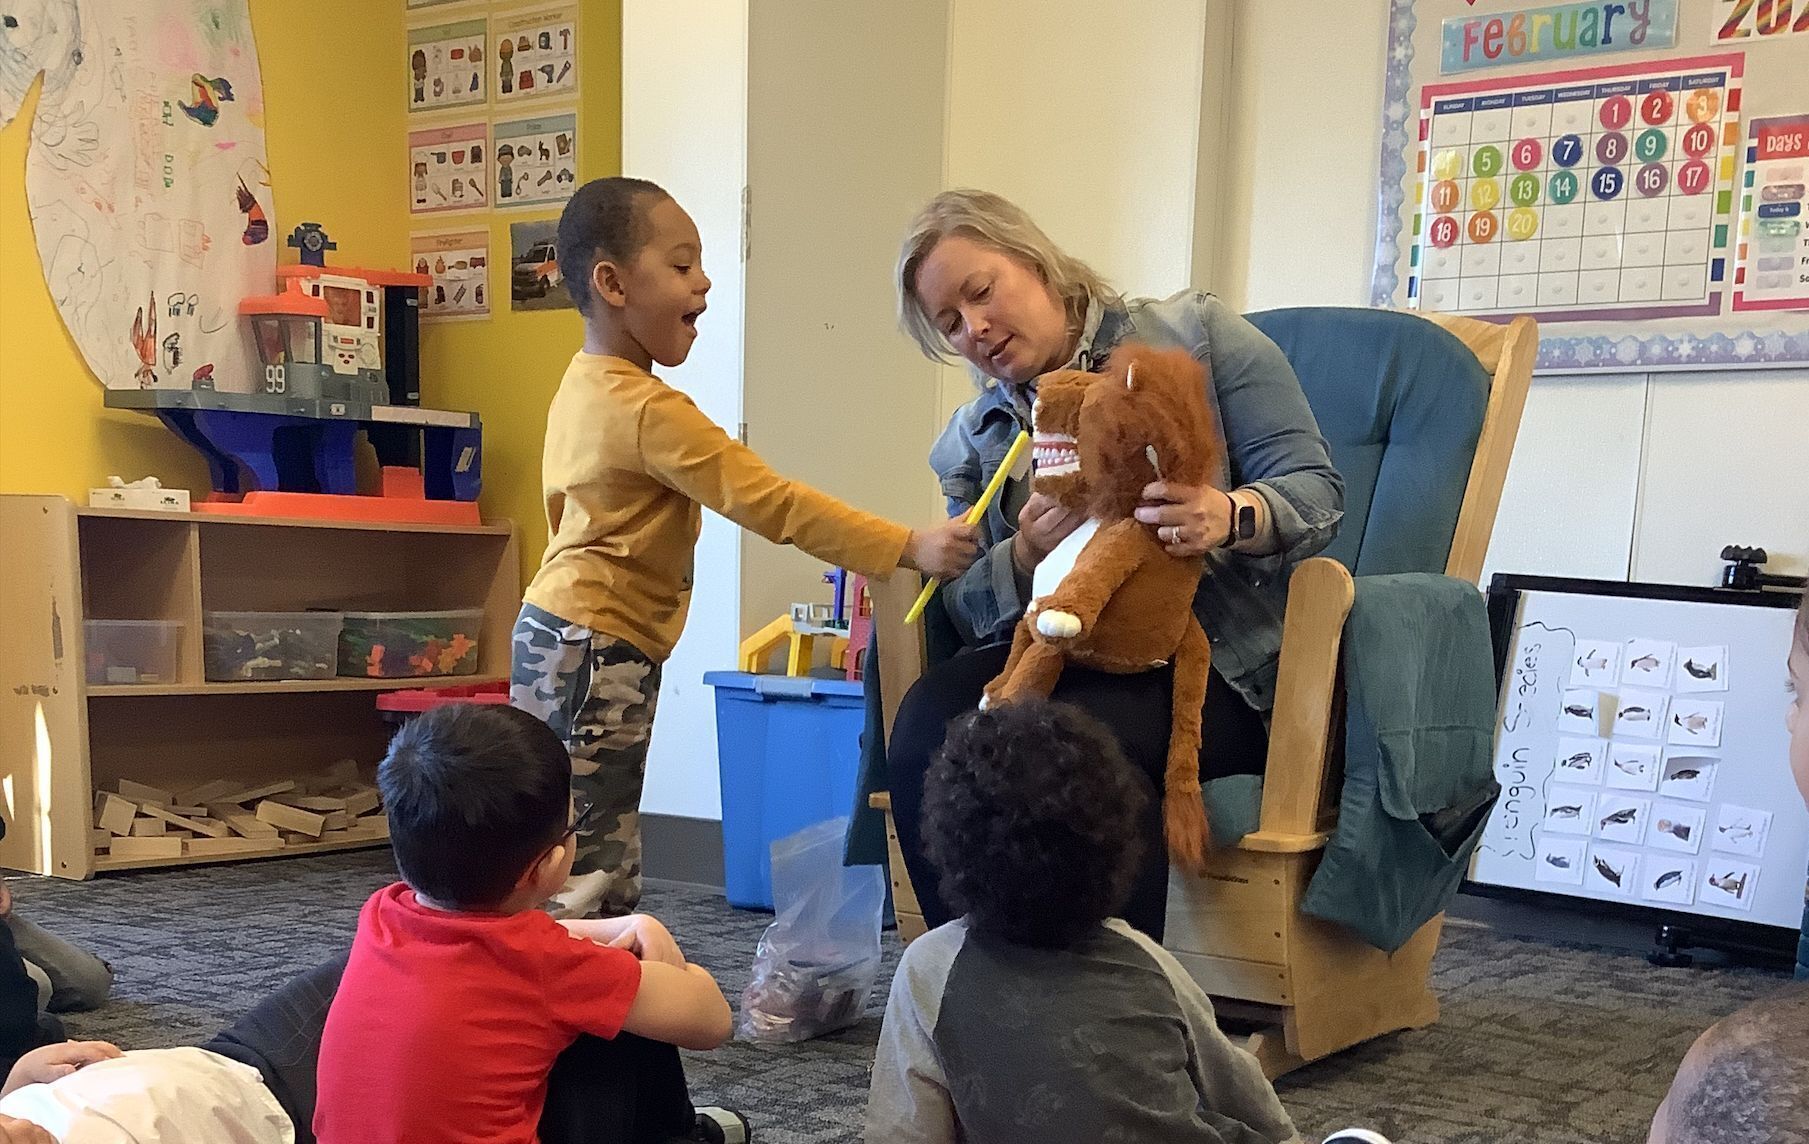 A lady is holding an animal puppet that is showing big fake teeth, while a preschool student "brushes its teeth" with a toothbrush. About a half dozen other preschoolers sit and watch.